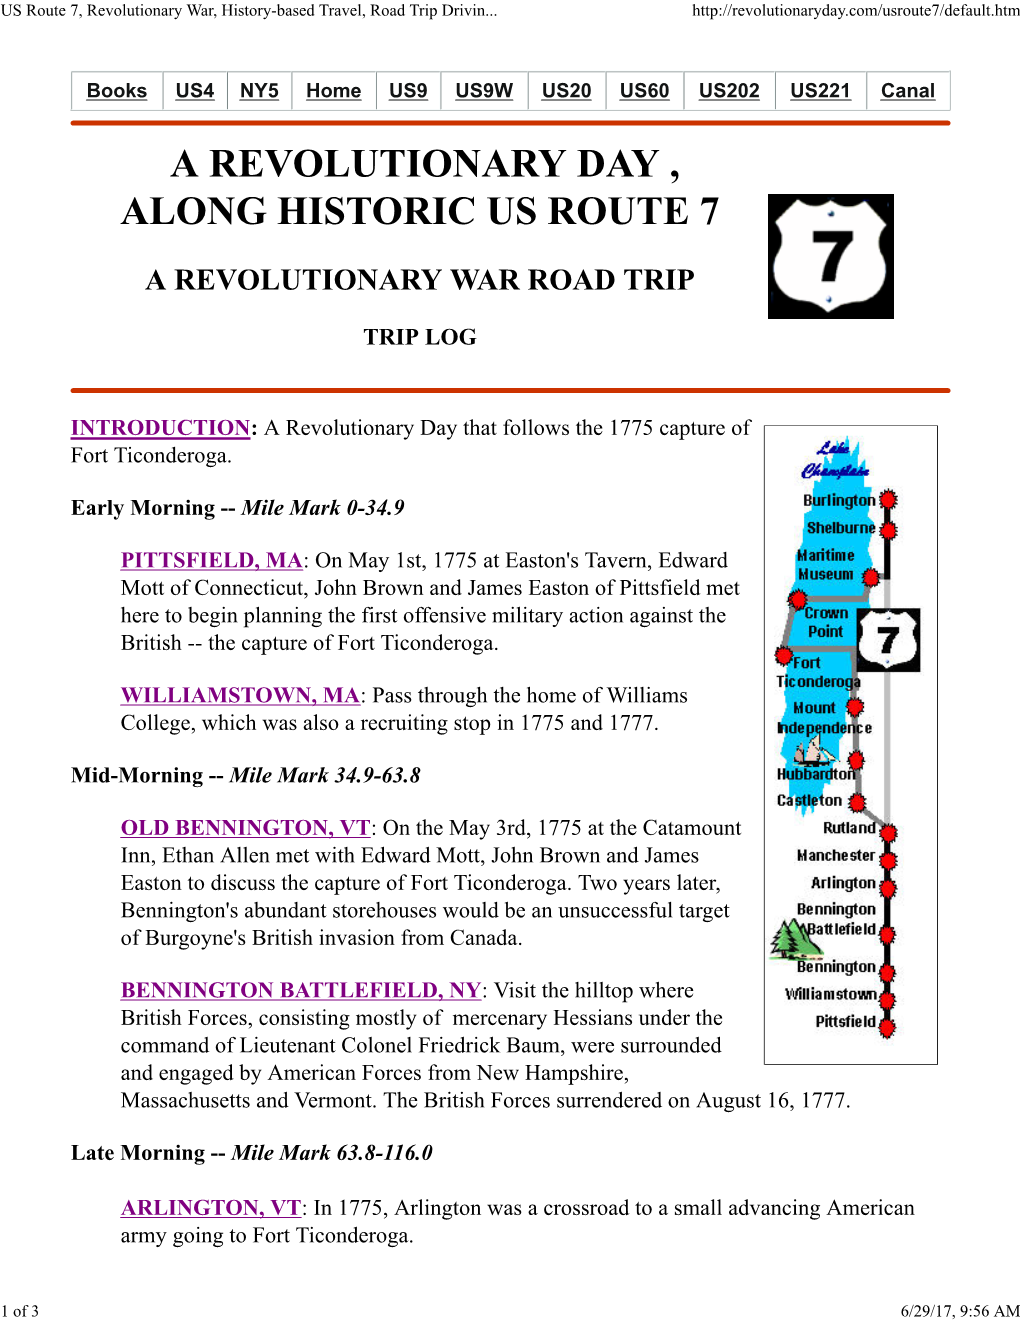 US Route 7, Revolutionary War, History-Based Travel, Road Trip Drivin